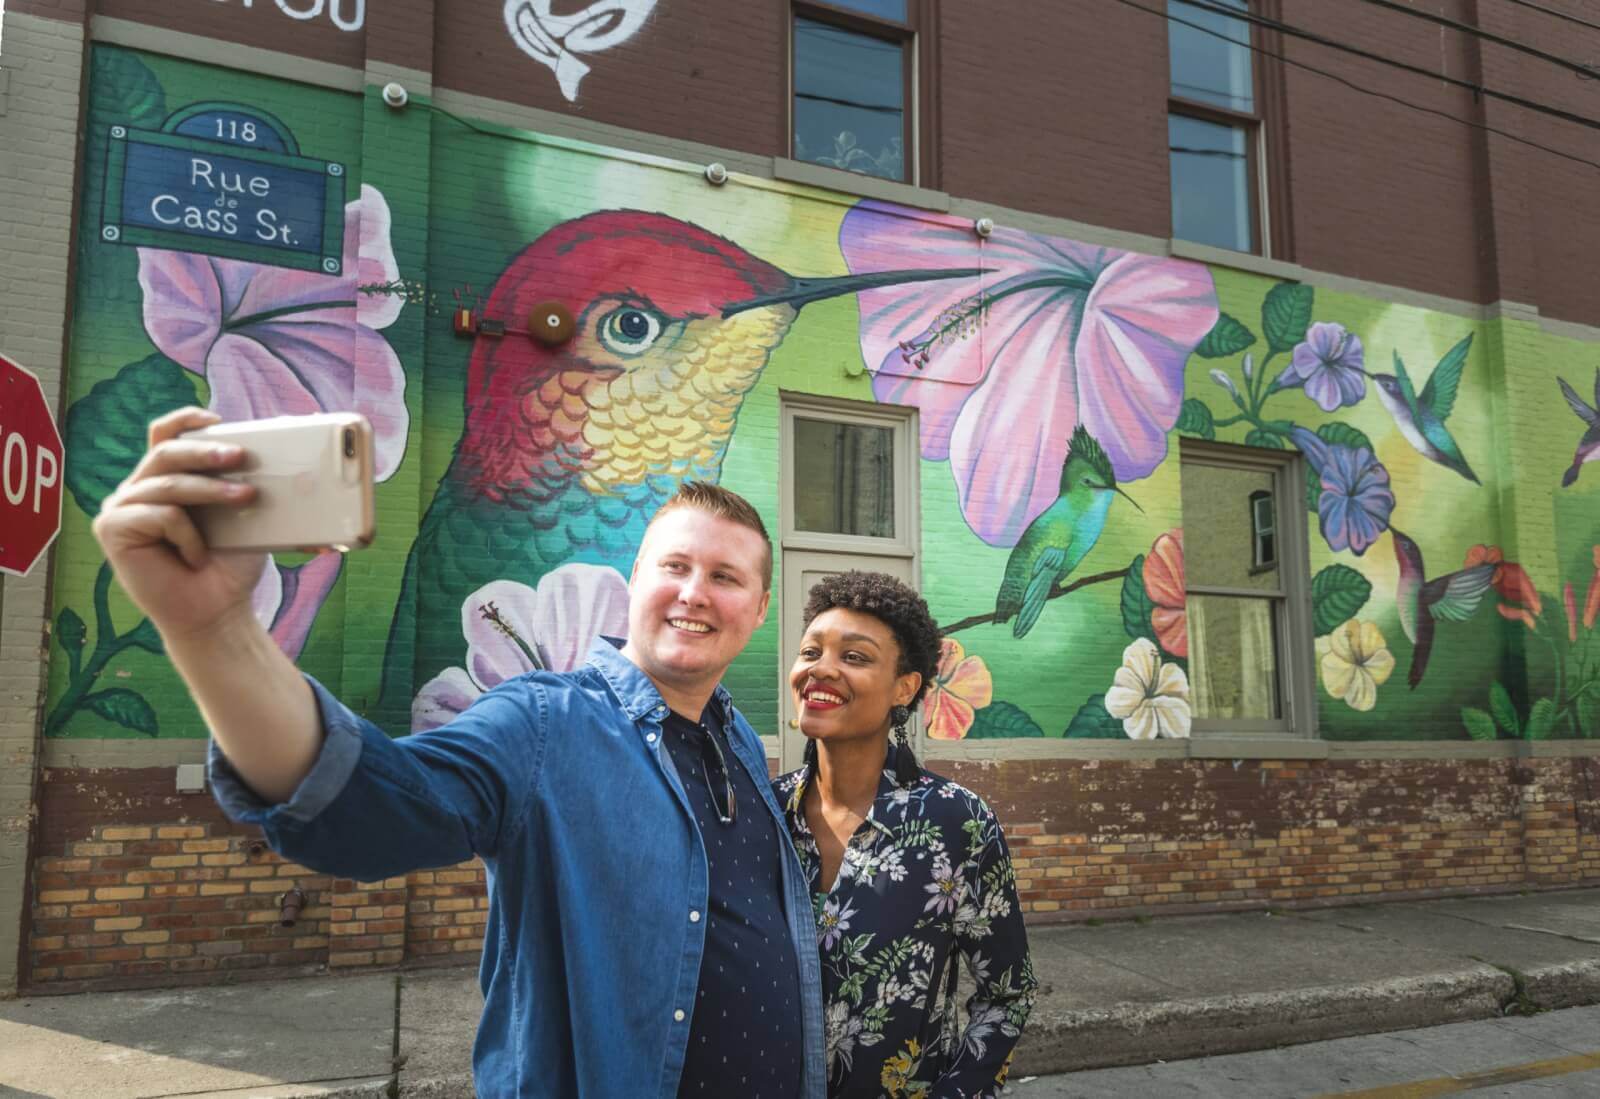 An interracial couple takes a selfie standing in front of a street mural in Traverse City, Michigan